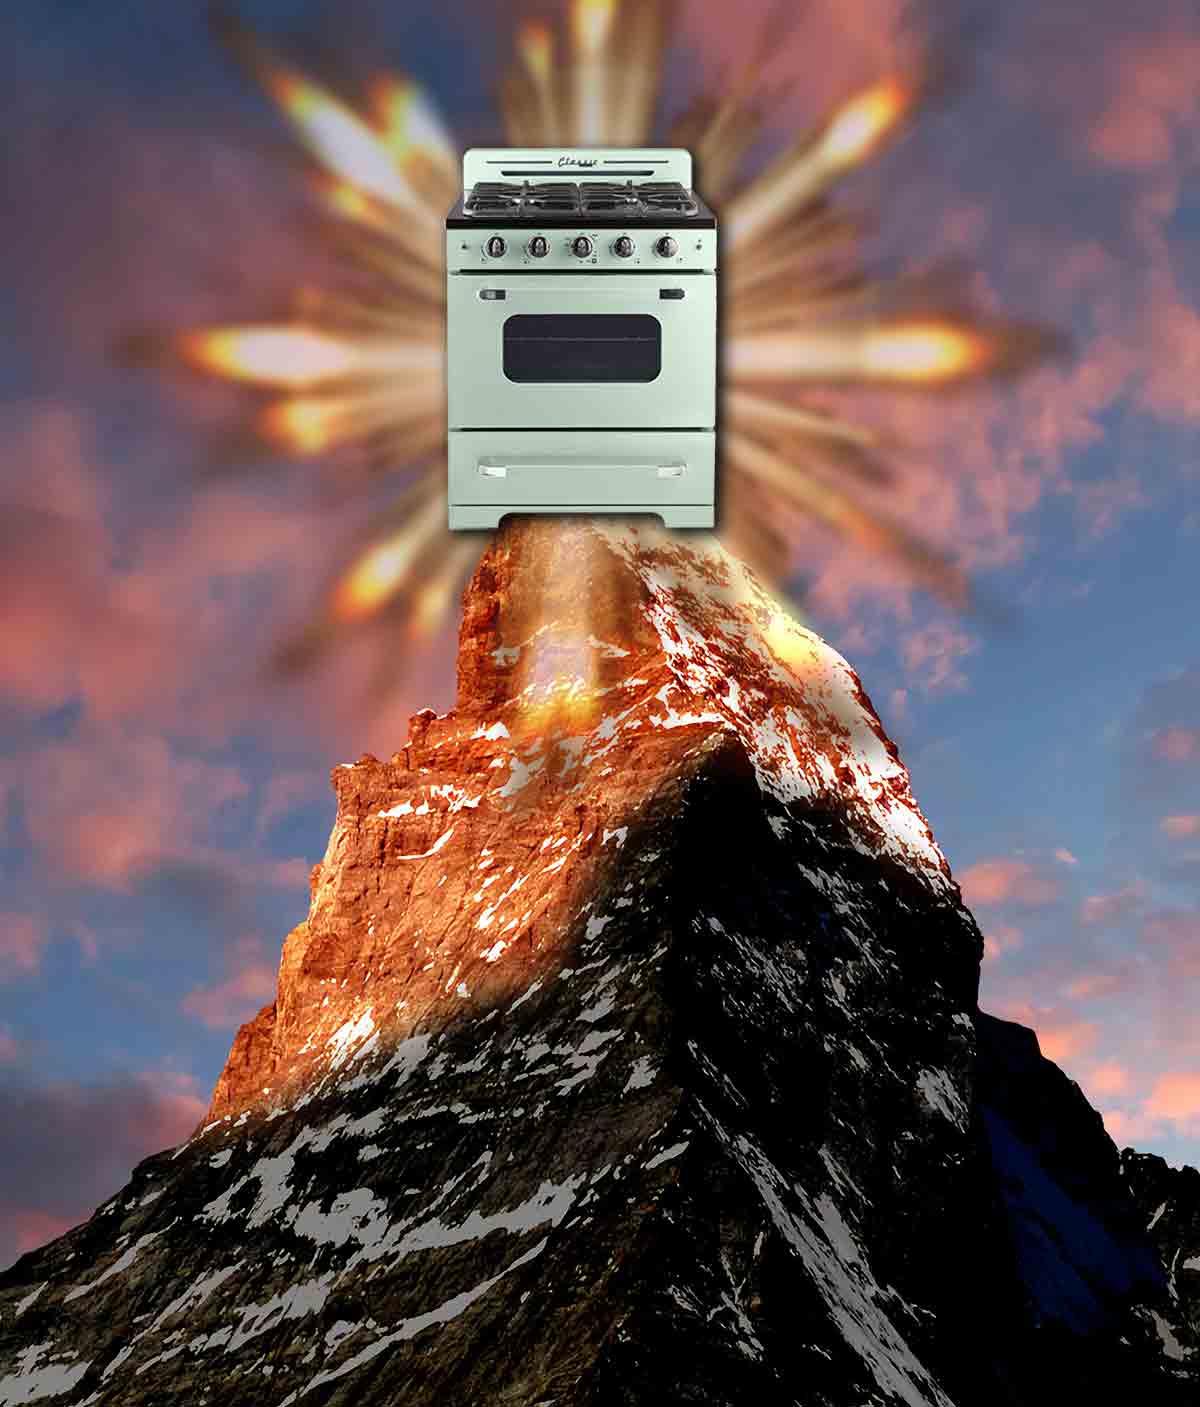 A mountain with an oven on its peak and a starburst behind